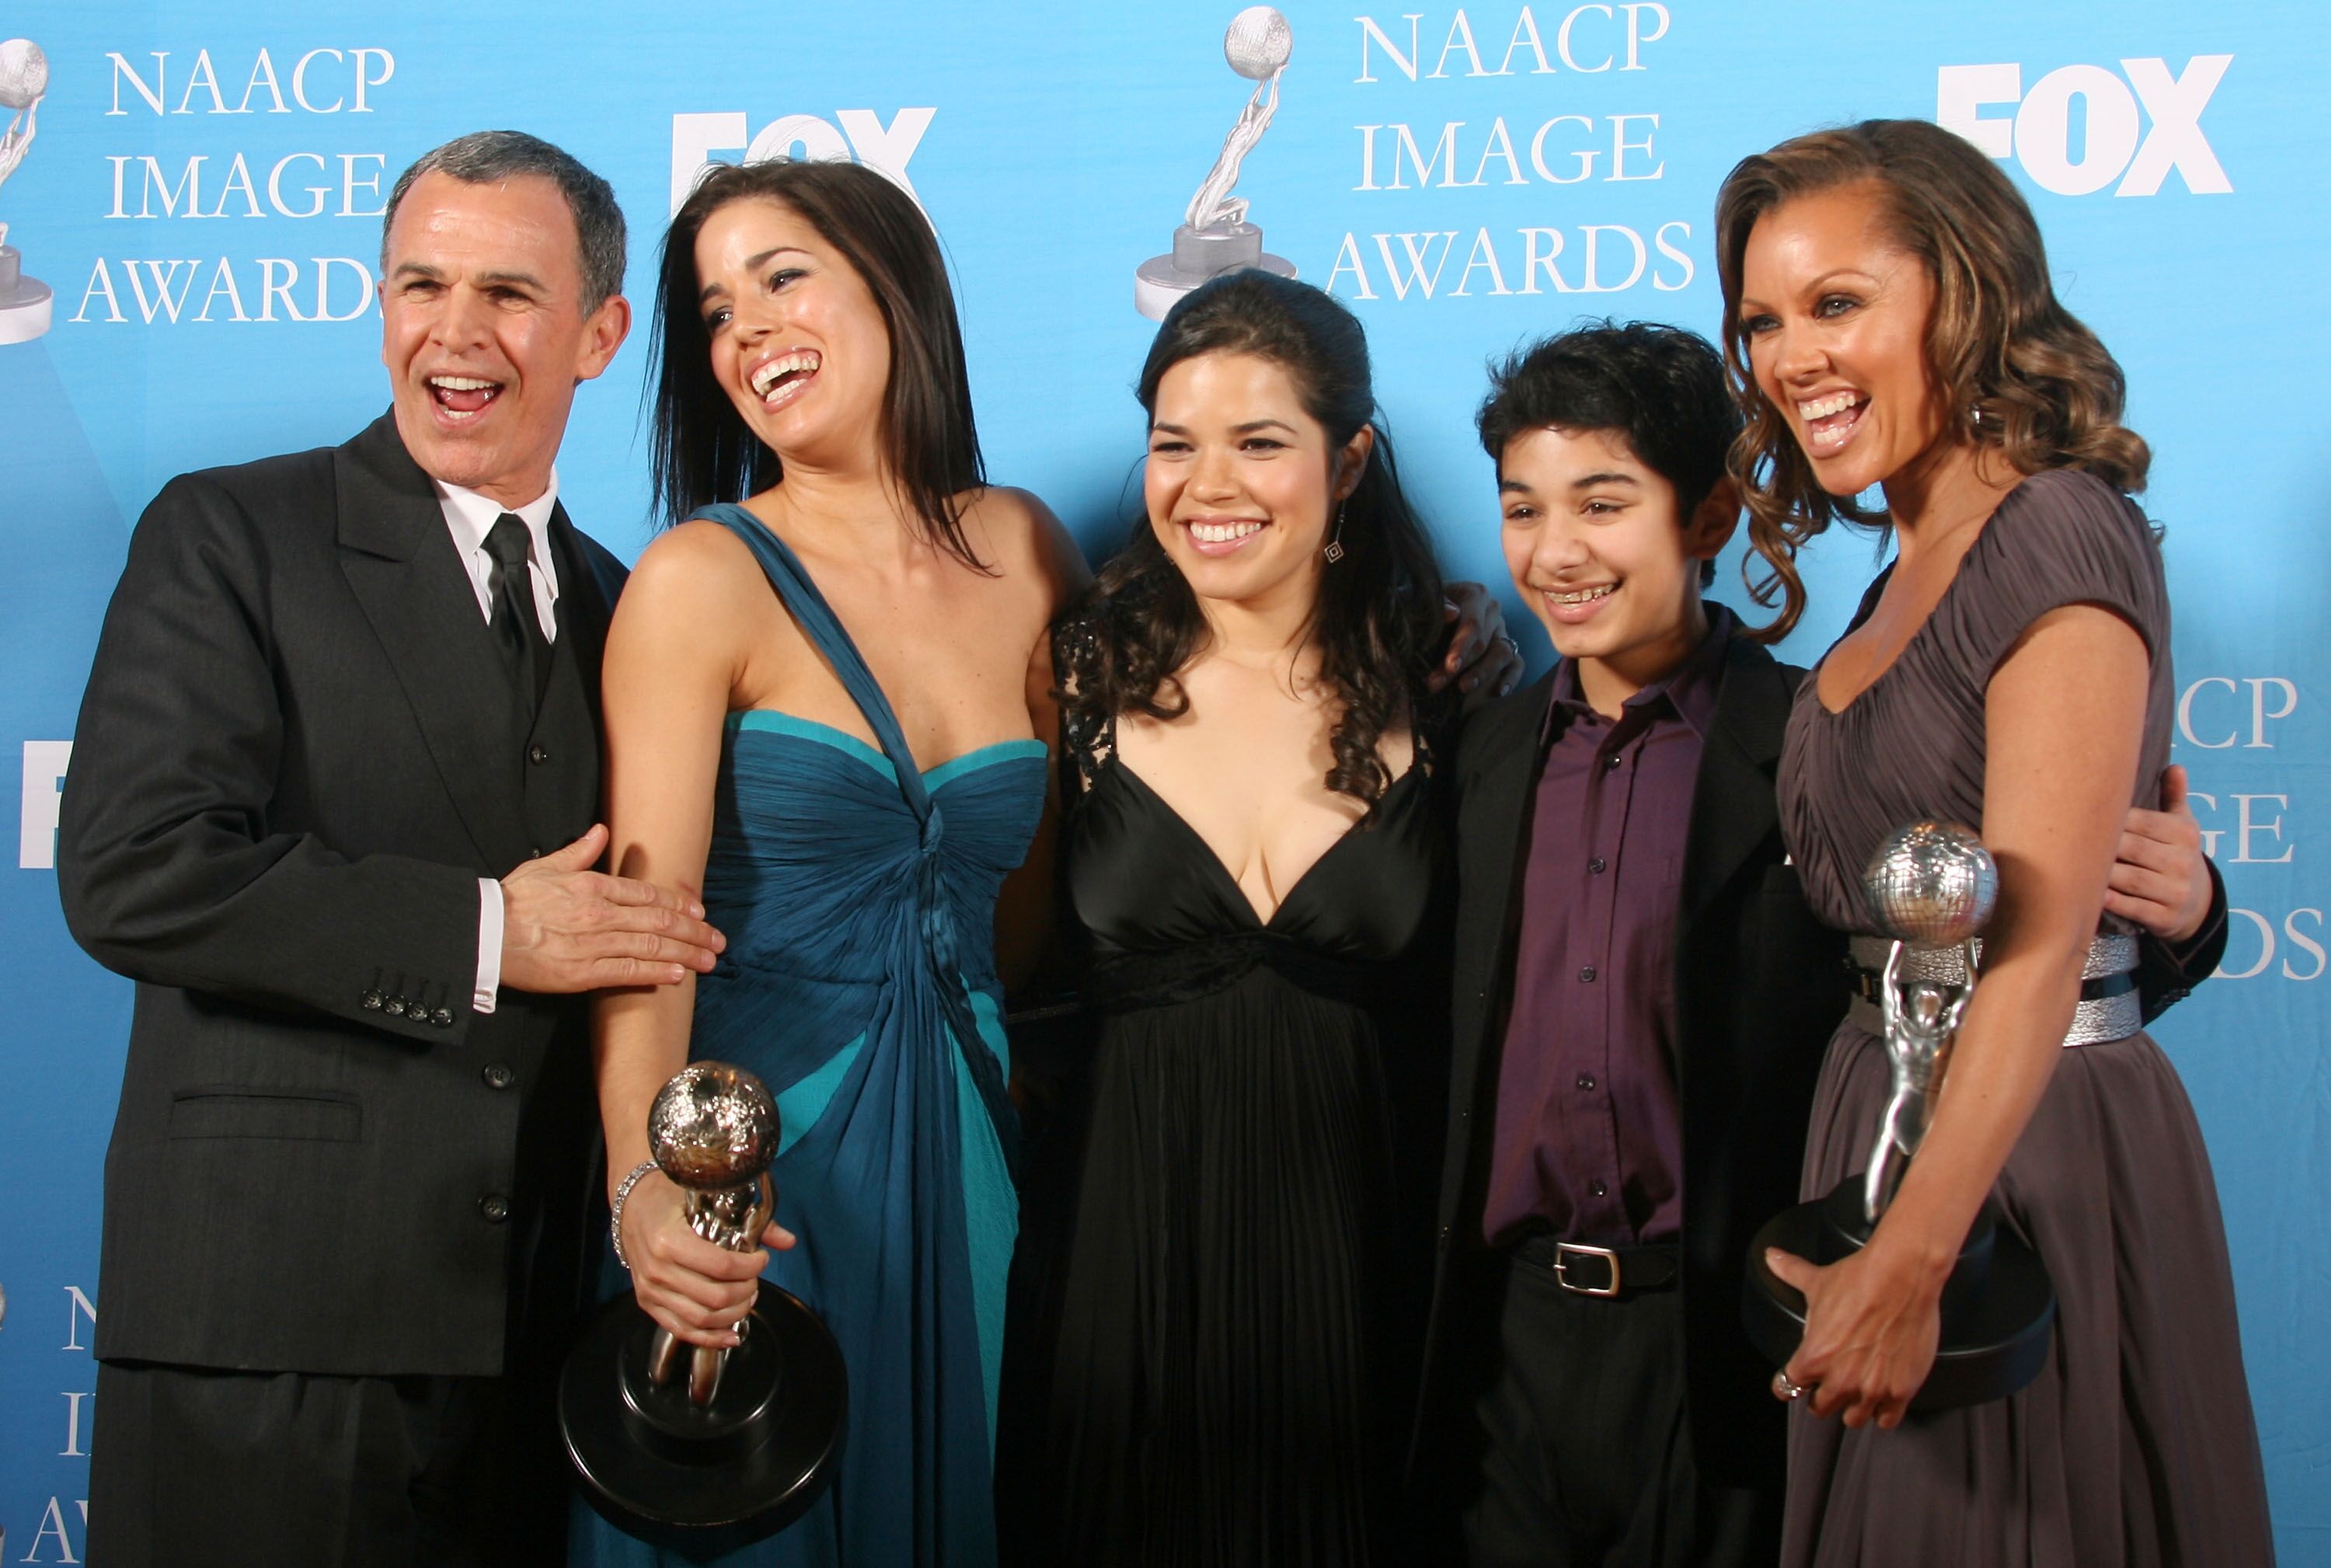 America Ferrera, Tony Plana, Ana Ortiz, Mark Indelicato and Vanessa Williams with the "Outstanding Comedy Series" award for the show "Ugly Betty at the Annual NAACP Image Awards in 2007 | Source: Getty Images